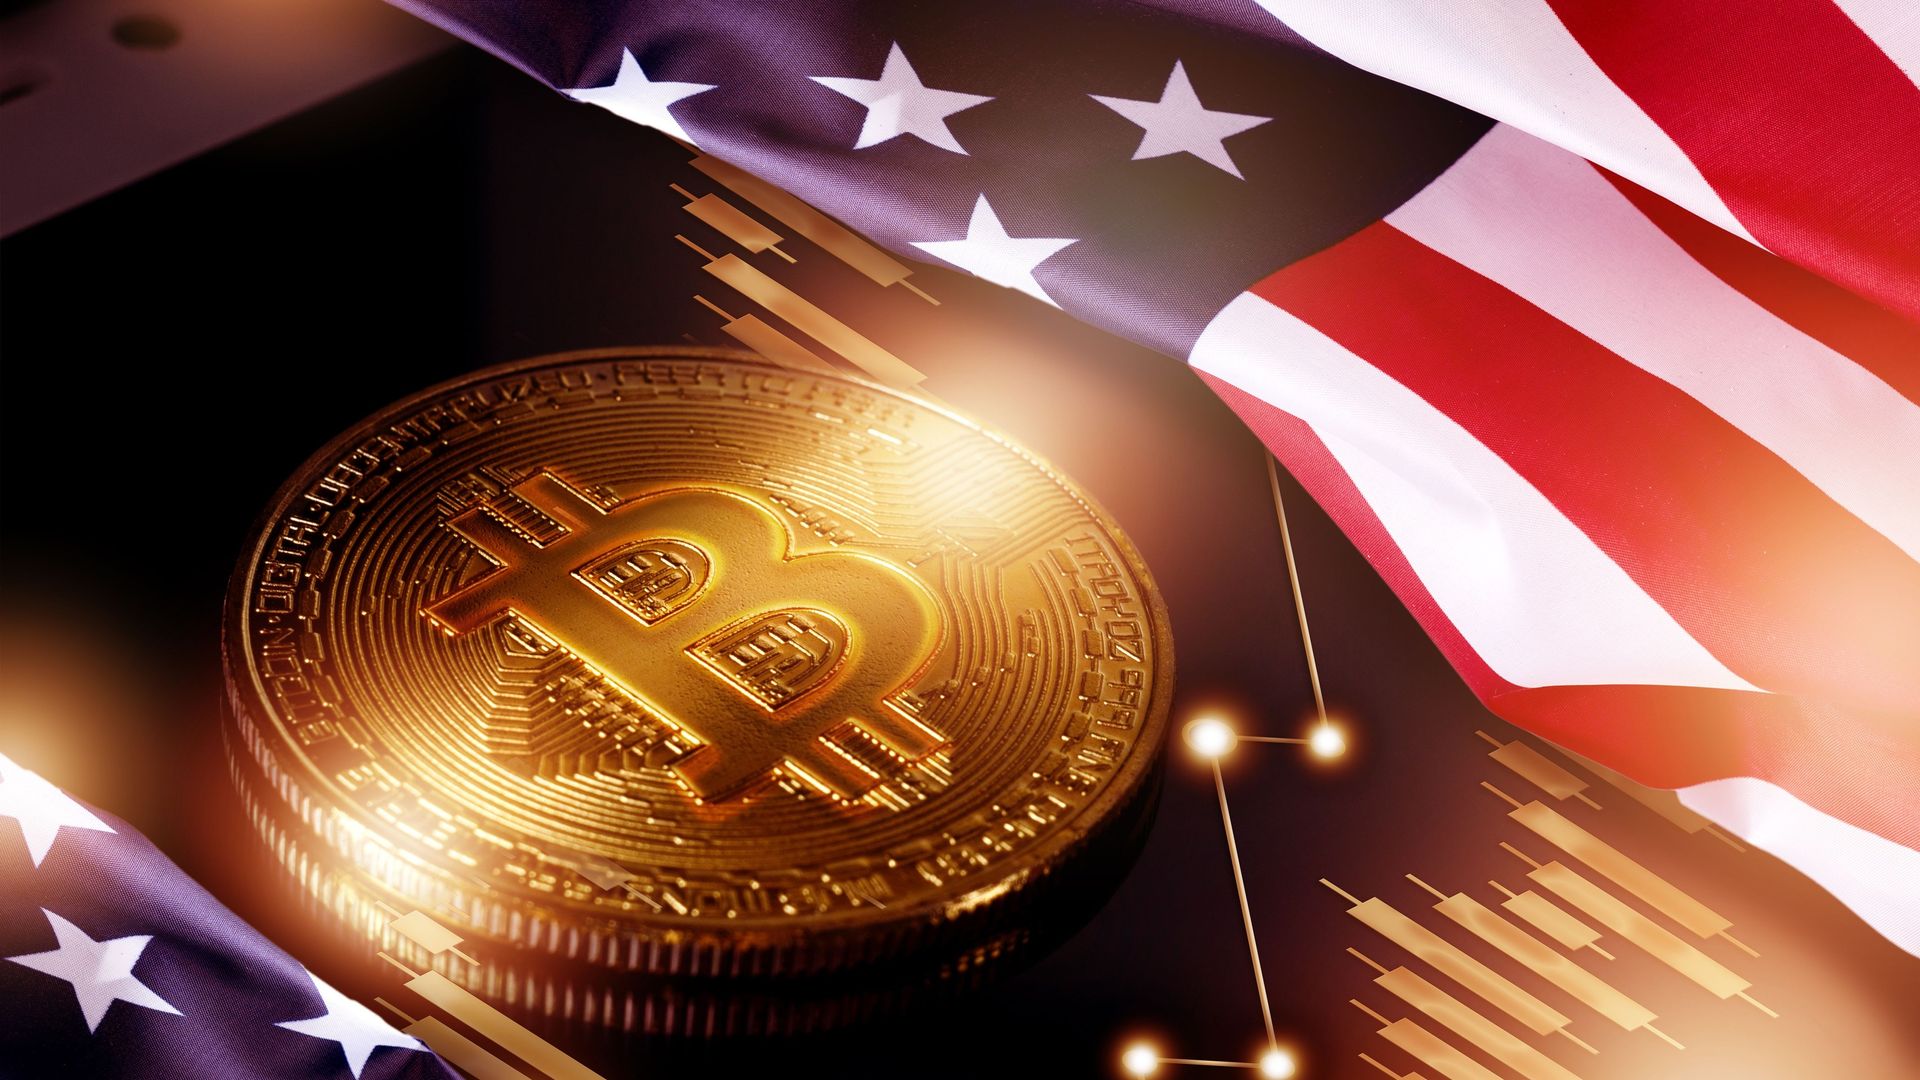 High inflation and transaction fees are pushing Americans to crypto – Coinbase teaser image